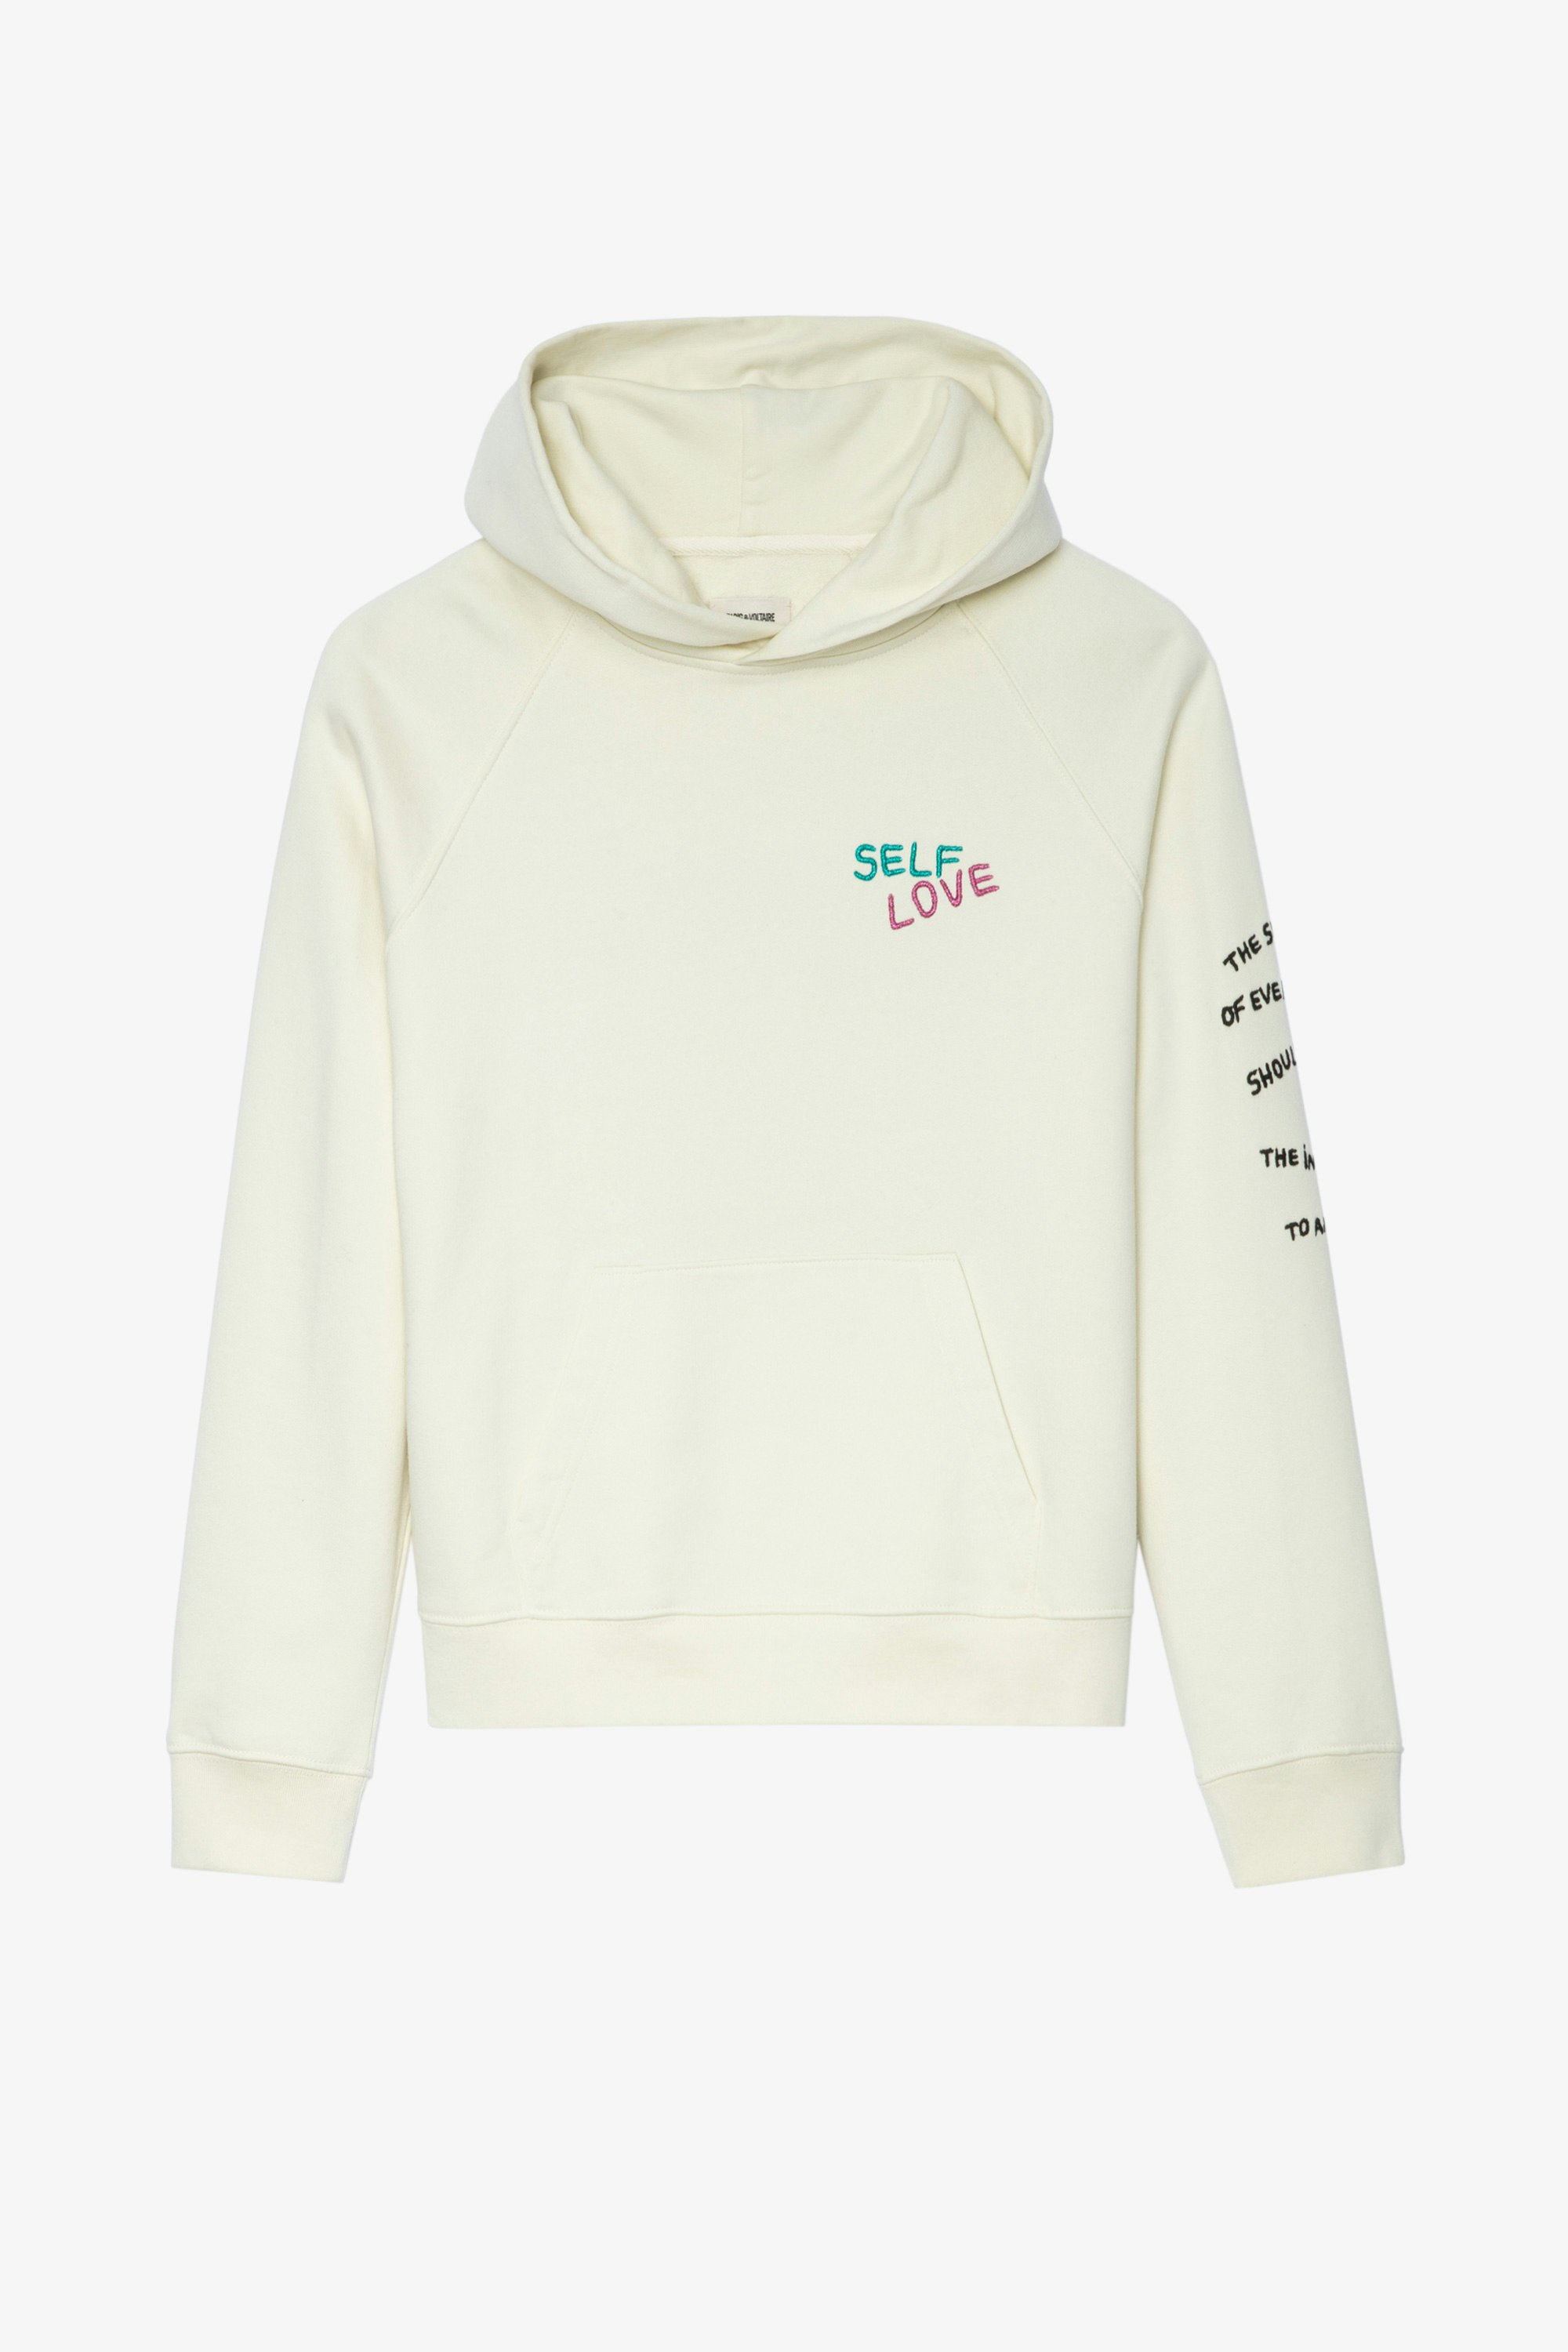 Georgy Shoes Band of Sisters スウェット Women’s Band of Sisters ecru cotton hooded sweatshirt